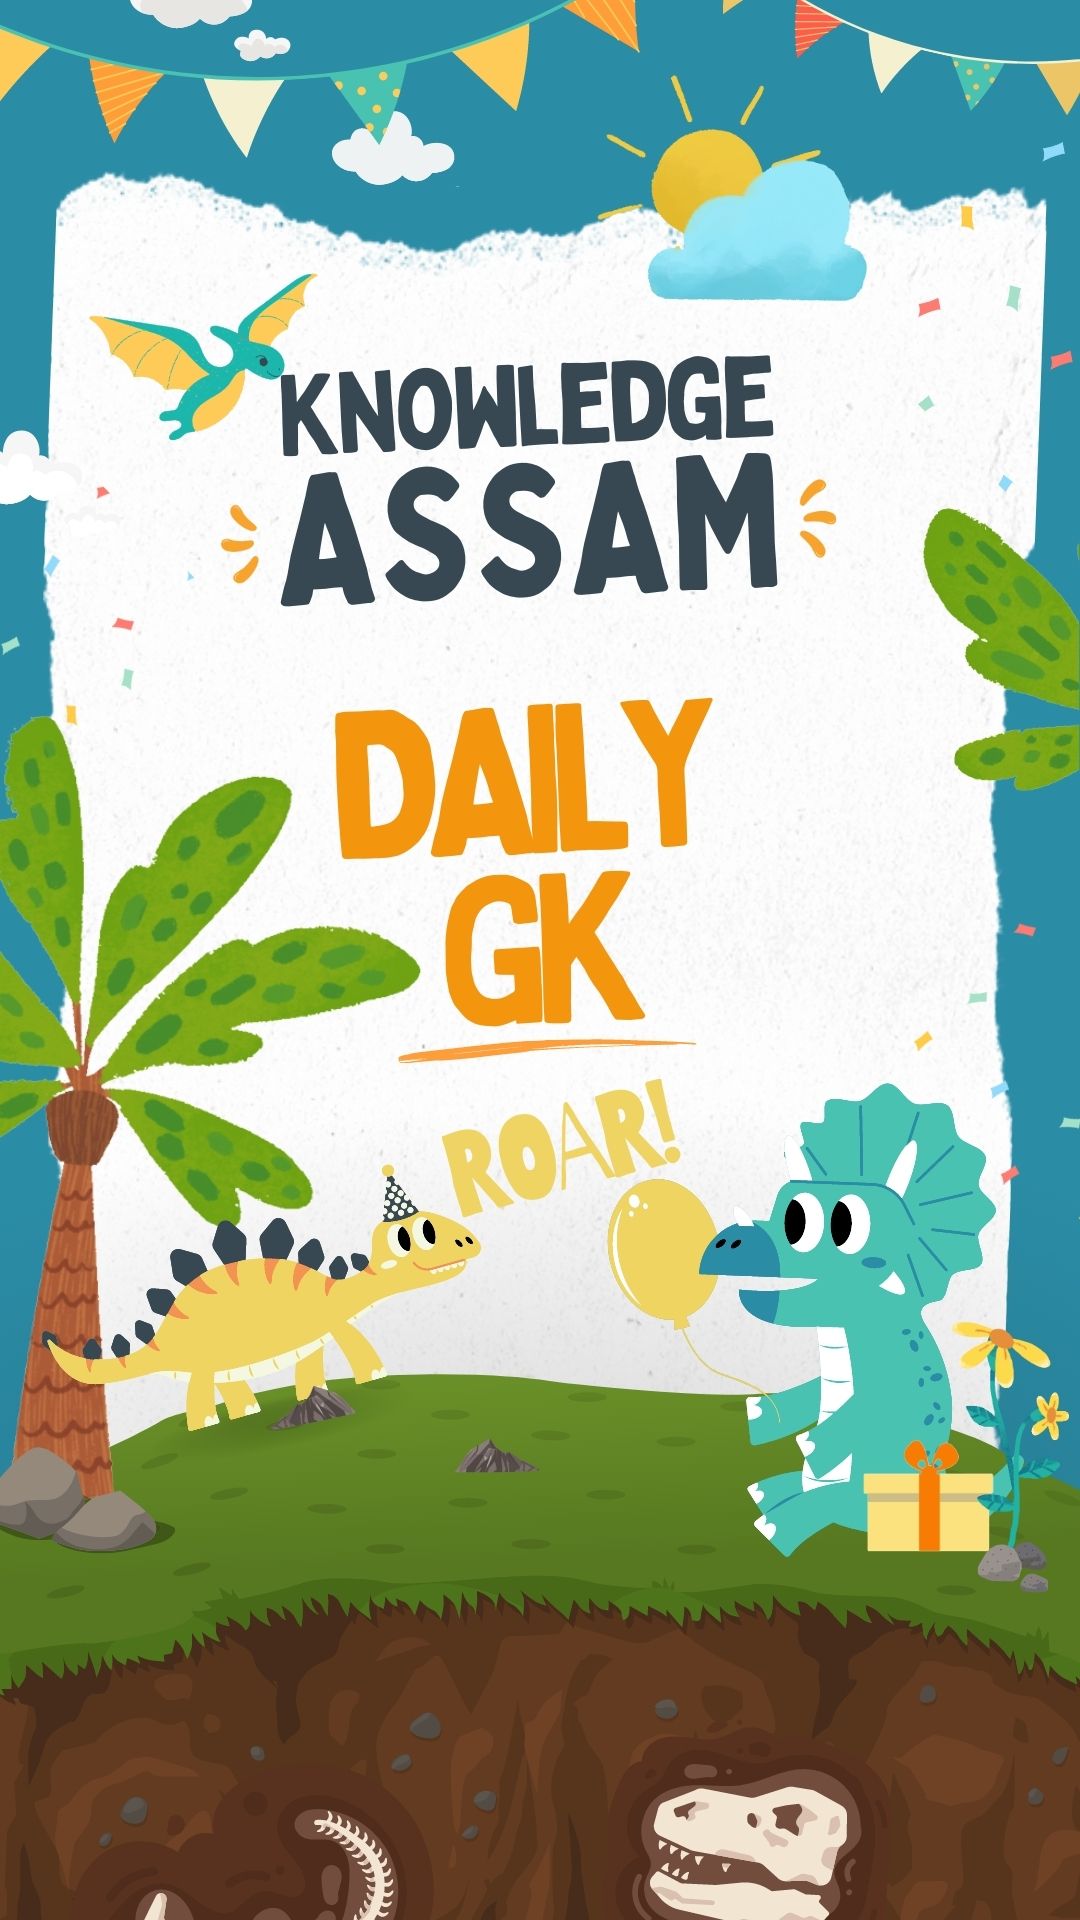 Knowledge Assam - daily information